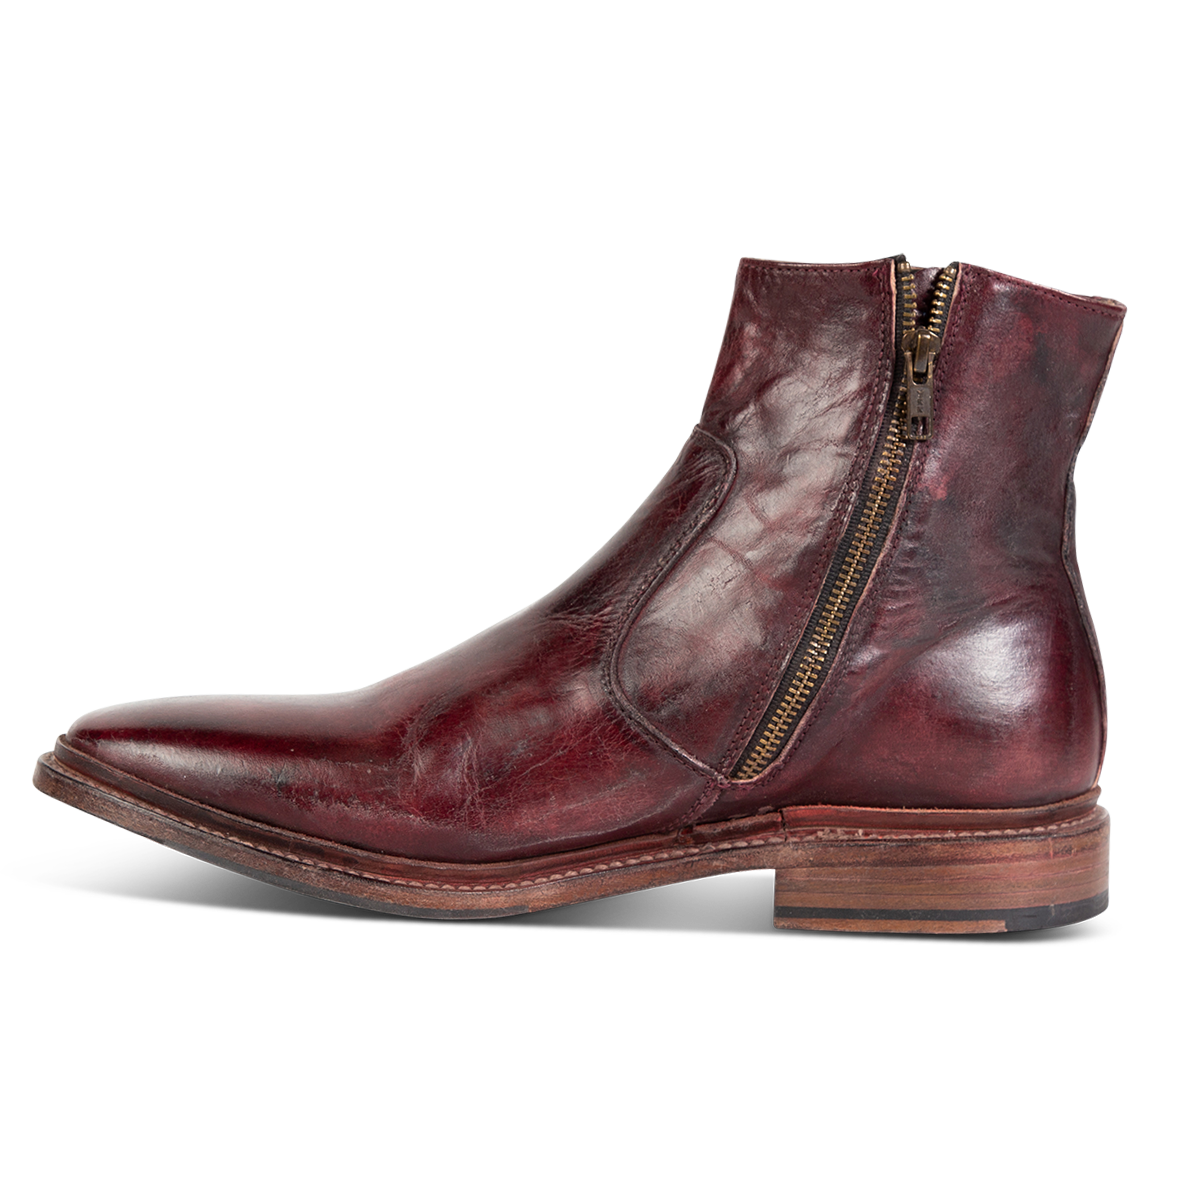 Inside view showing working zip closure and stitch detailing on FREEBIRD men's Douglas wine ankle boot